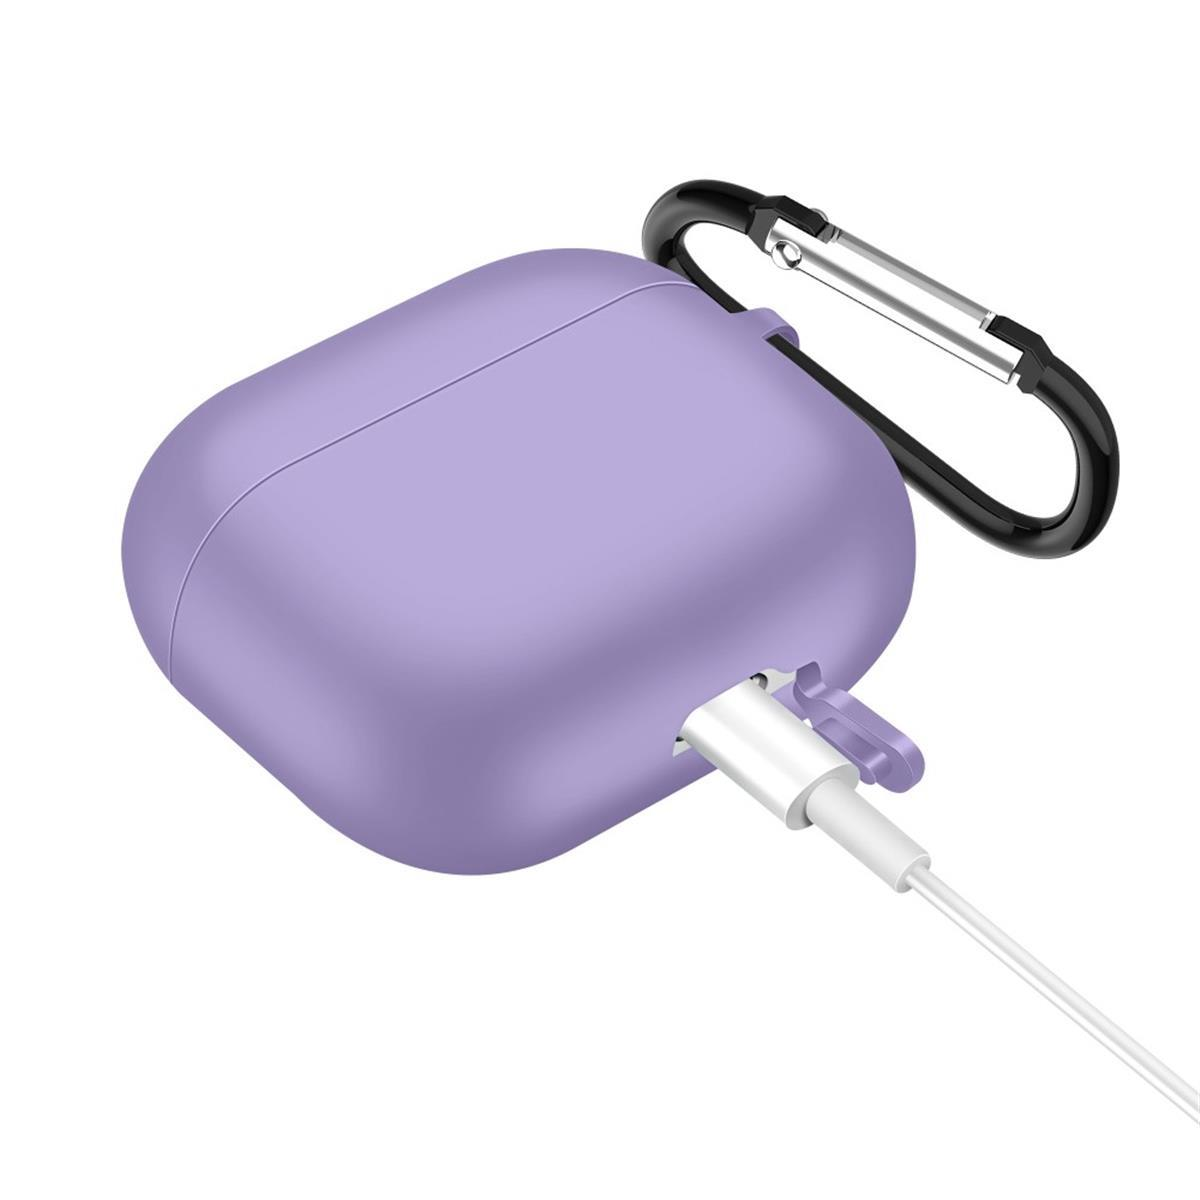 76811 AirPods 3 Silikoncover Apple Ladecase Lila, Damen, COVERKINGZ für